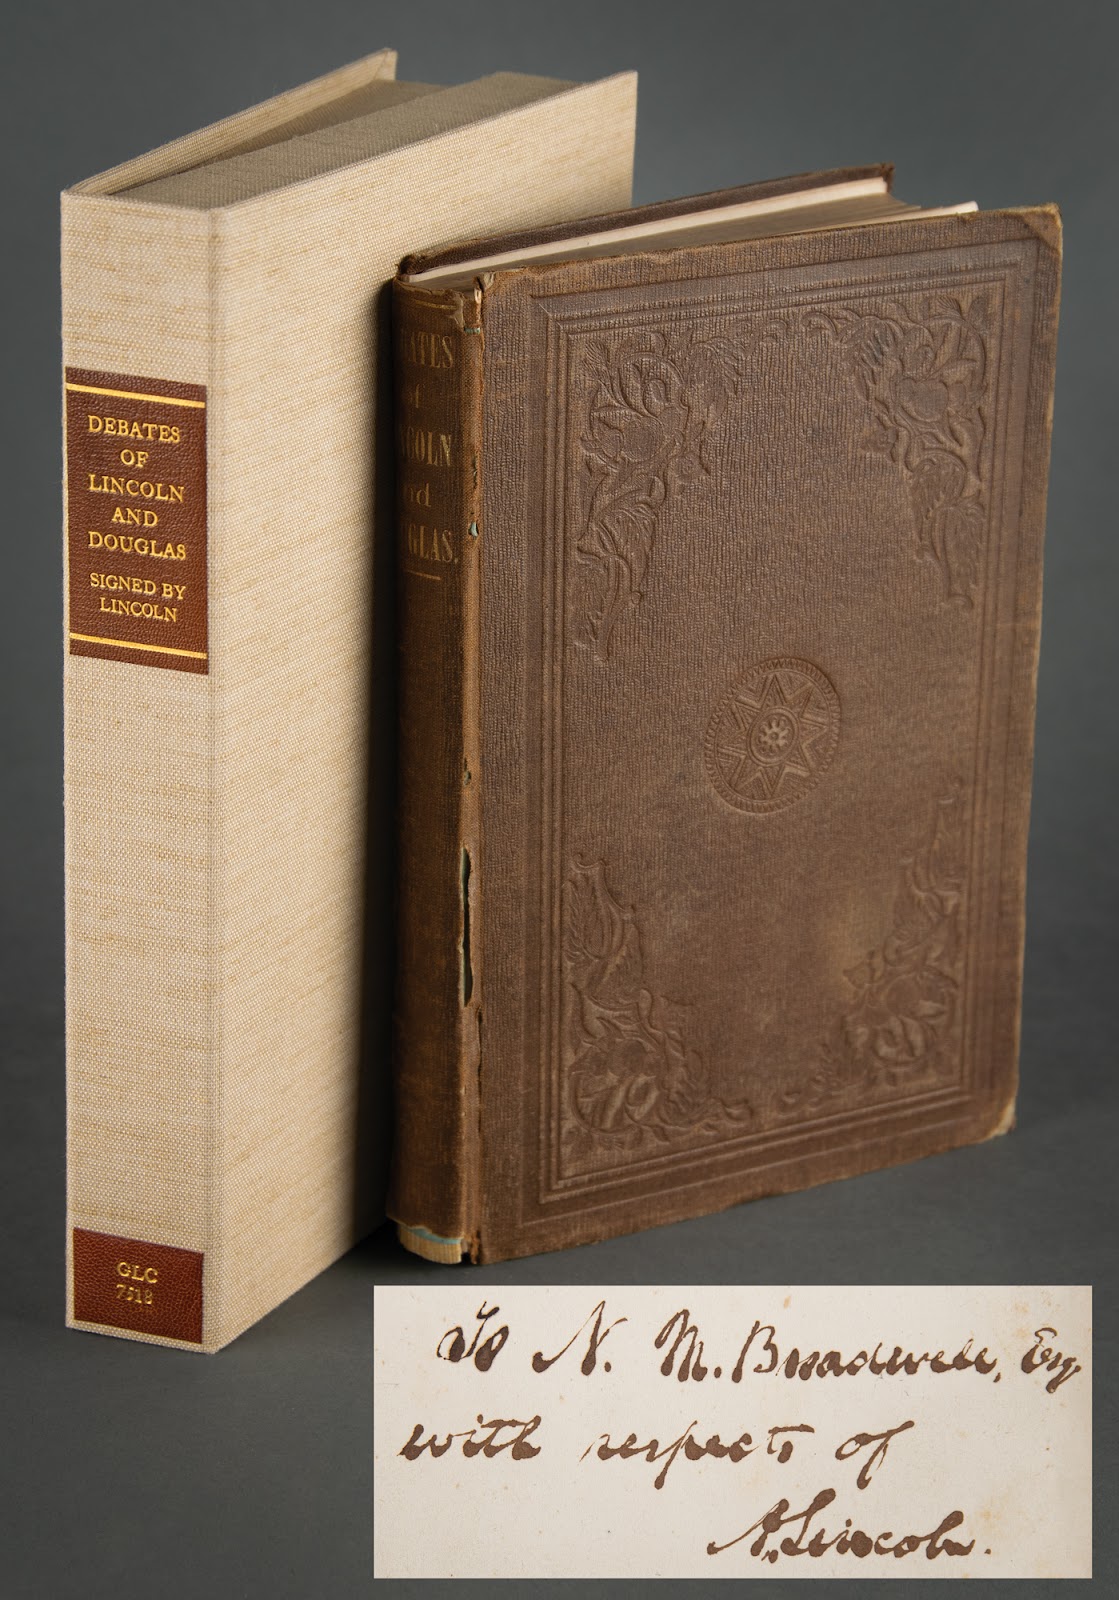 First edition printing of the Lincoln-Douglas Debates published in 1860 pictured with its custom clamshell case and a photo of Lincoln’s signature.